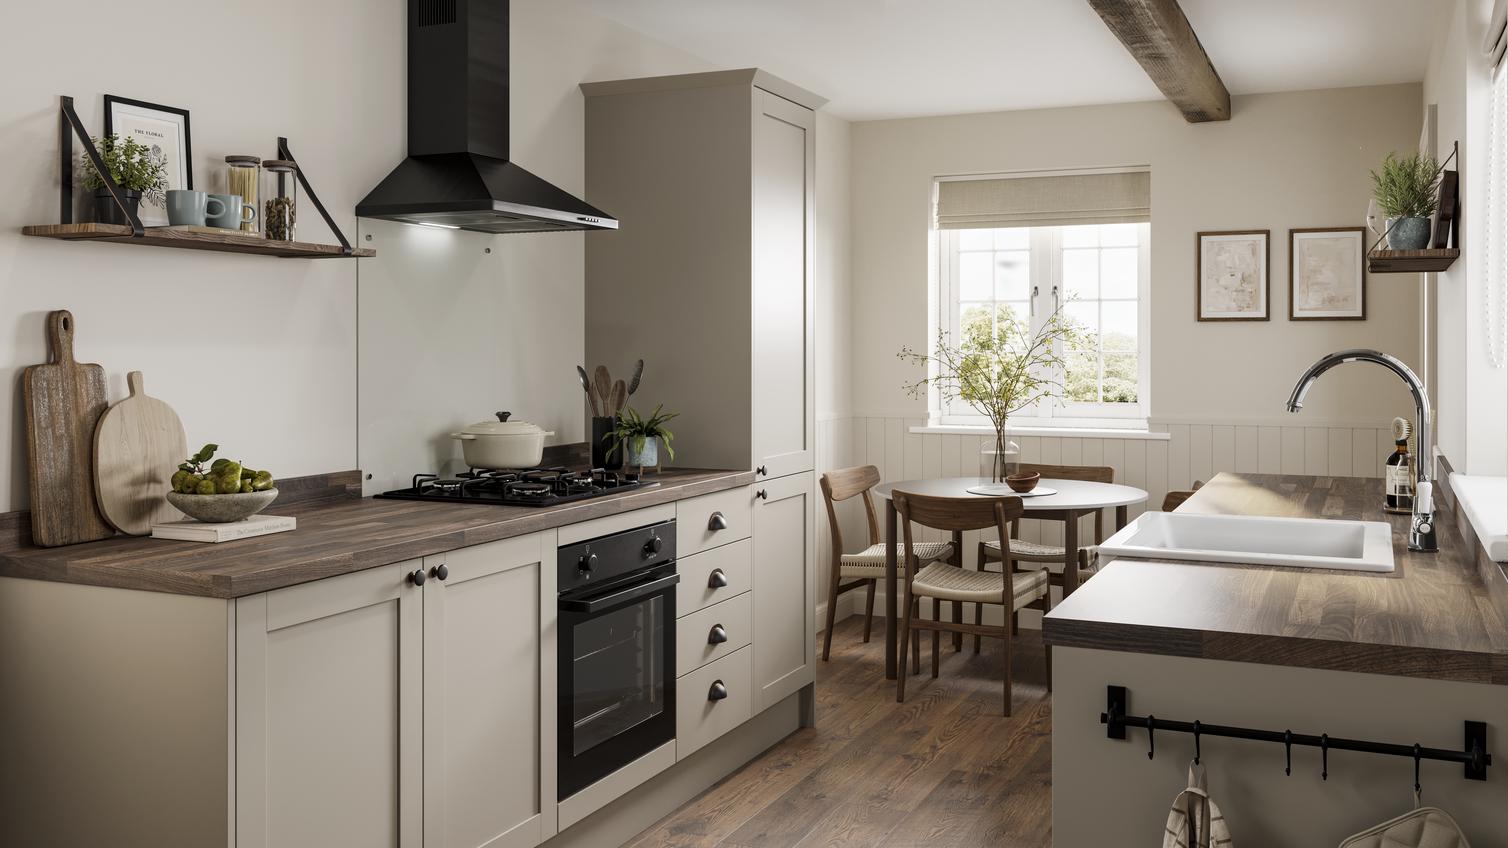 A rustic kitchen in a galley layout. Contains cream, shaker cupboards, dark-wood worktops, and a black, built-under oven.